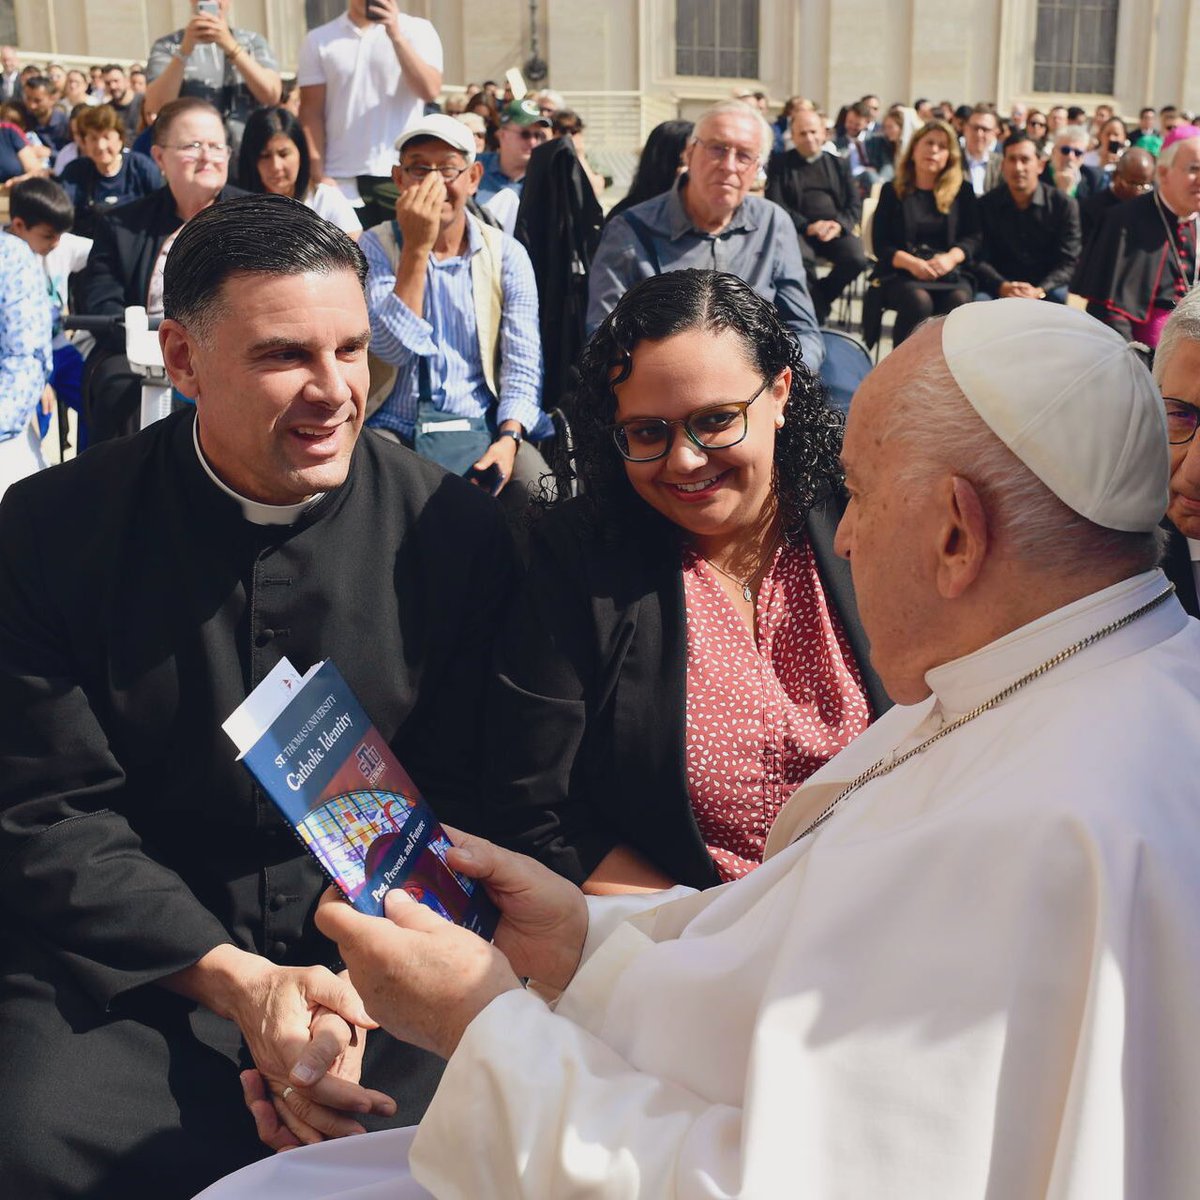 Blessed to greet the Holy Father with US delegate Isabelle Seiglie and present the @StThomasUniv @StThomasLaw Catholic Identity and Student Prayer books. Pope Francis listened to our @CatholicMiami STU Catholic Identity process and gave us a blessing for all in the STU